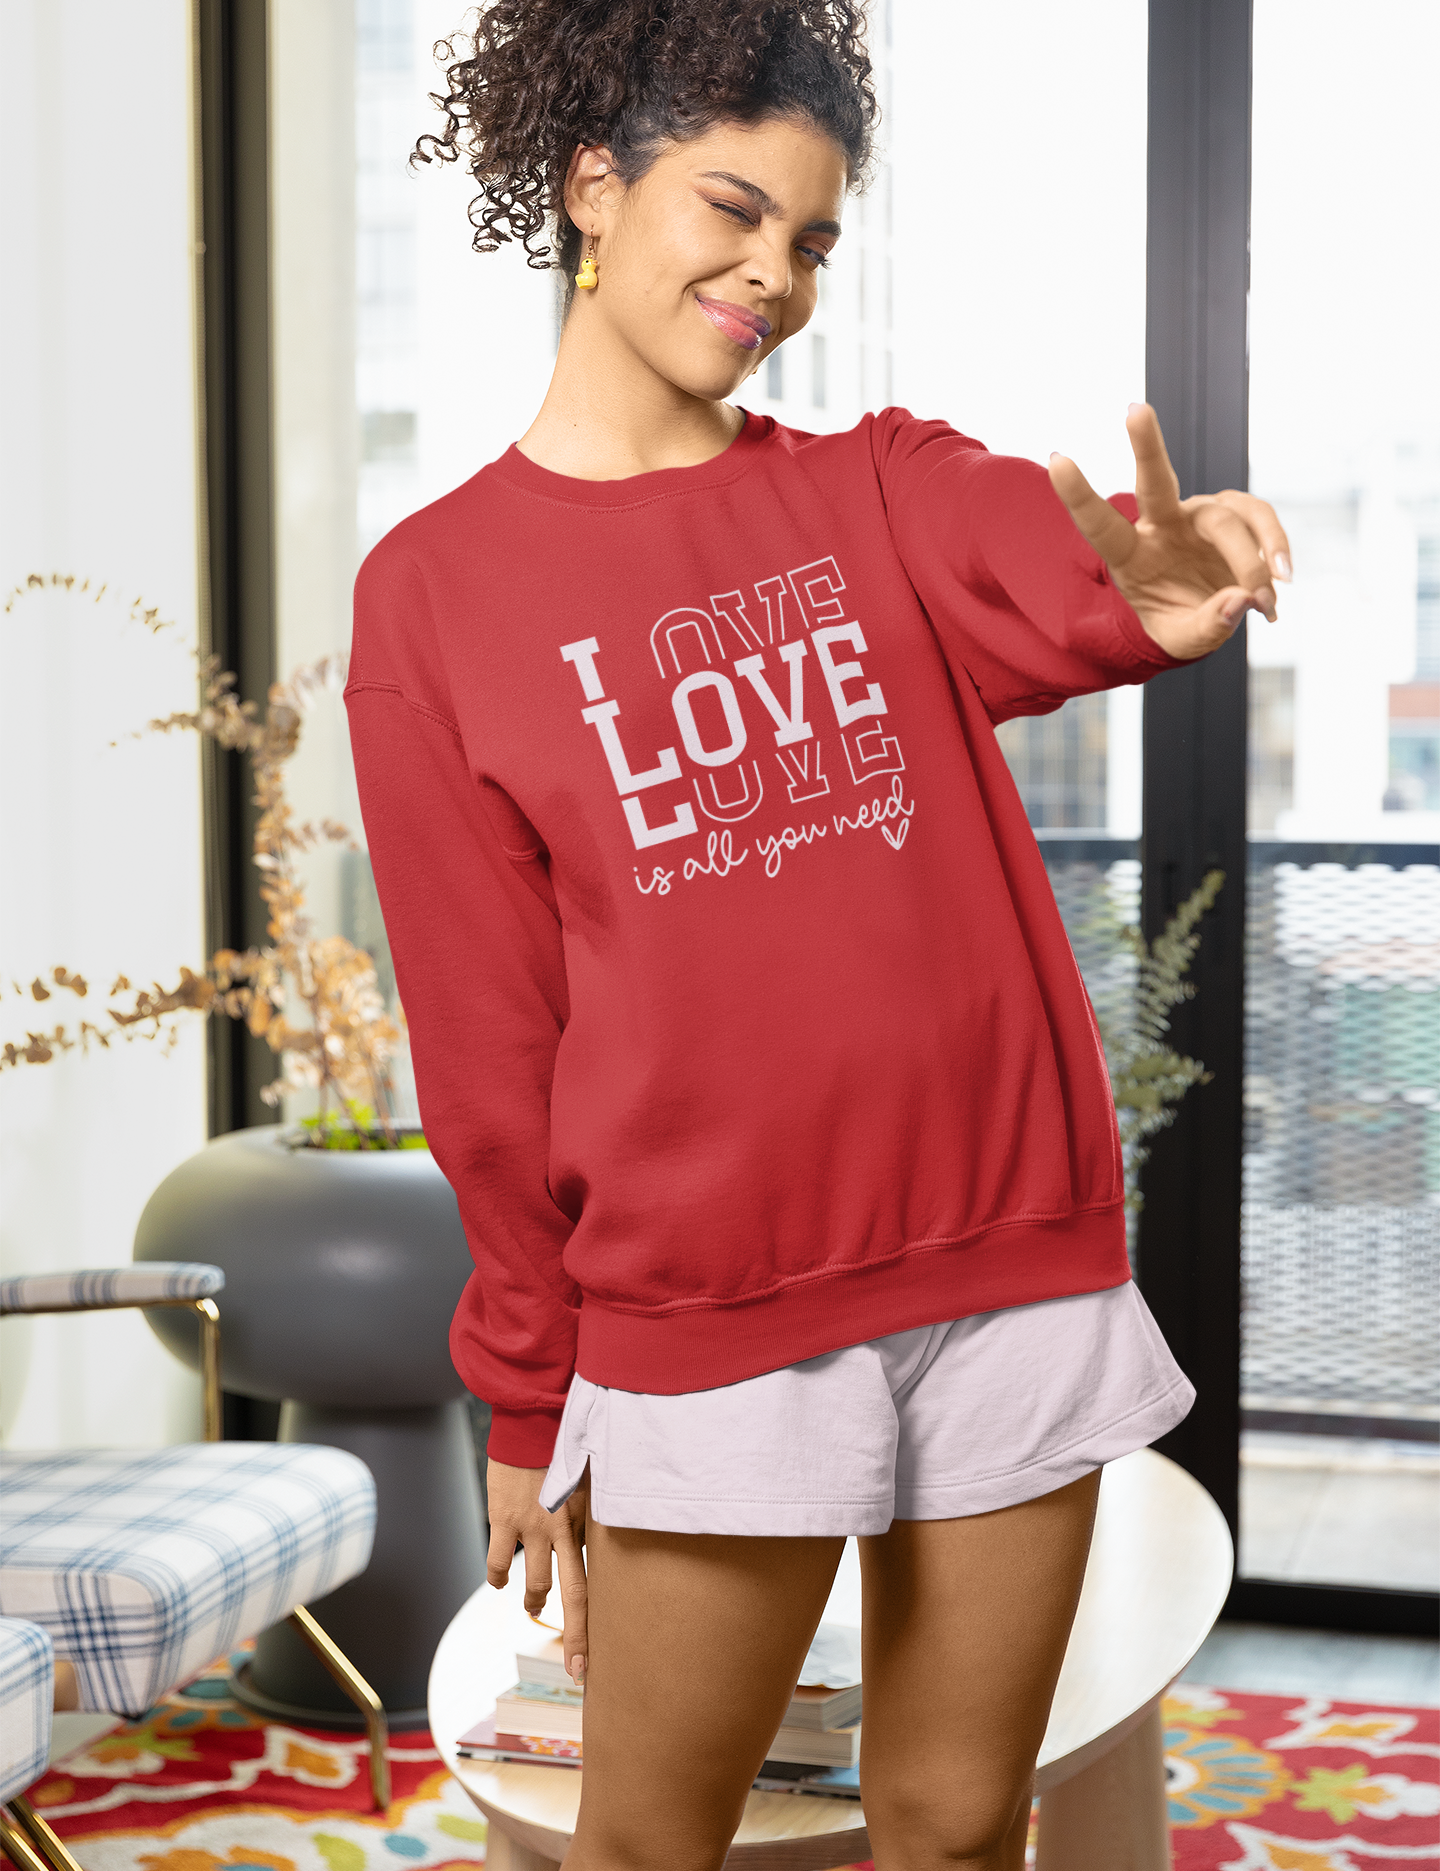 gildan-sweatshirt-mockup-featuring-a-smiling-woman-doing-the-peace-sign-m32073.png